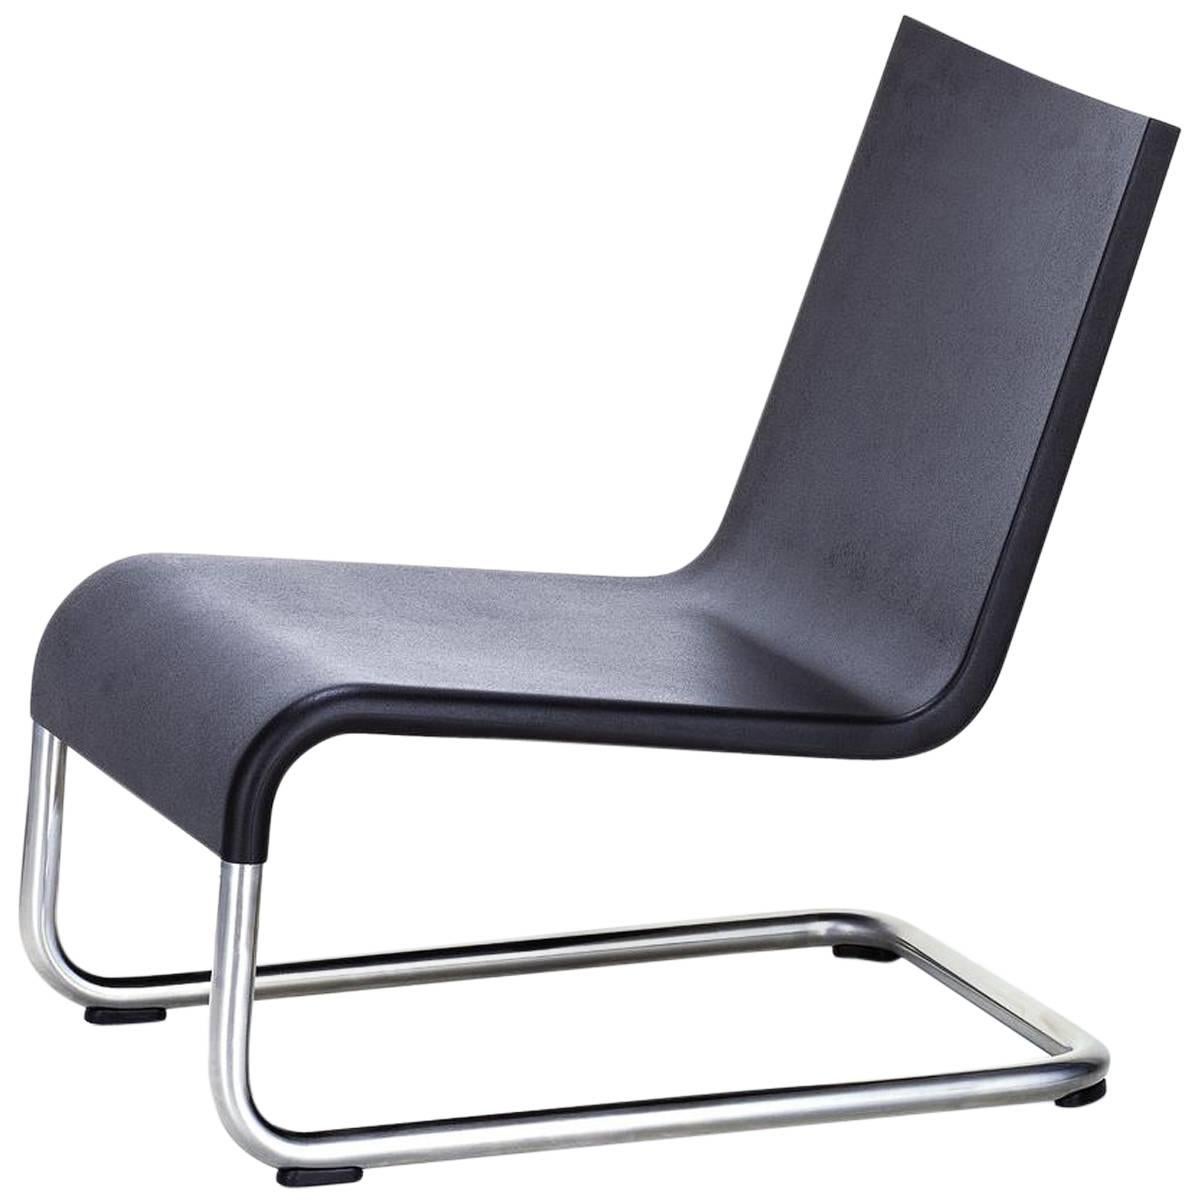 Vitra .06 Lounge Chair in Basic Black with Stainless Steel Legs